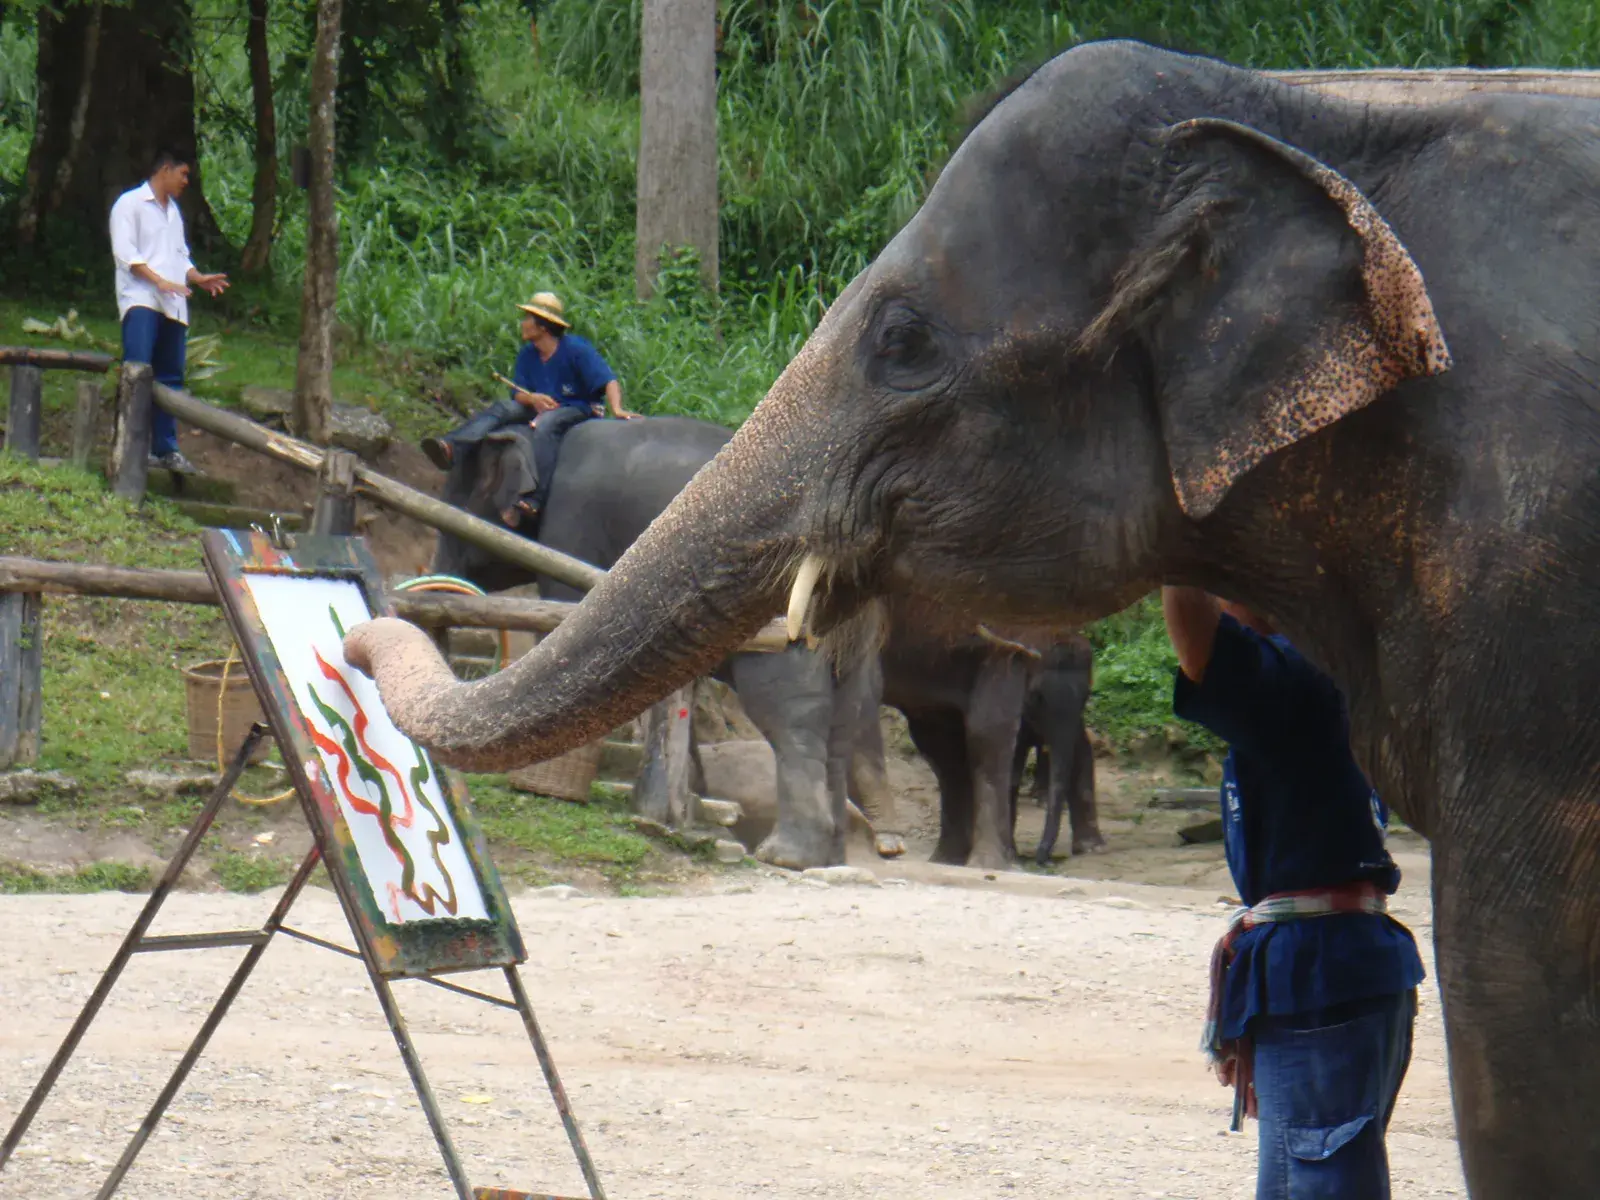 Do you think only humans can make art? What if animals like elephants could make art, too? If an elephant were painting, what things do you think it would depict? Would its painting be different from what a human would paint?